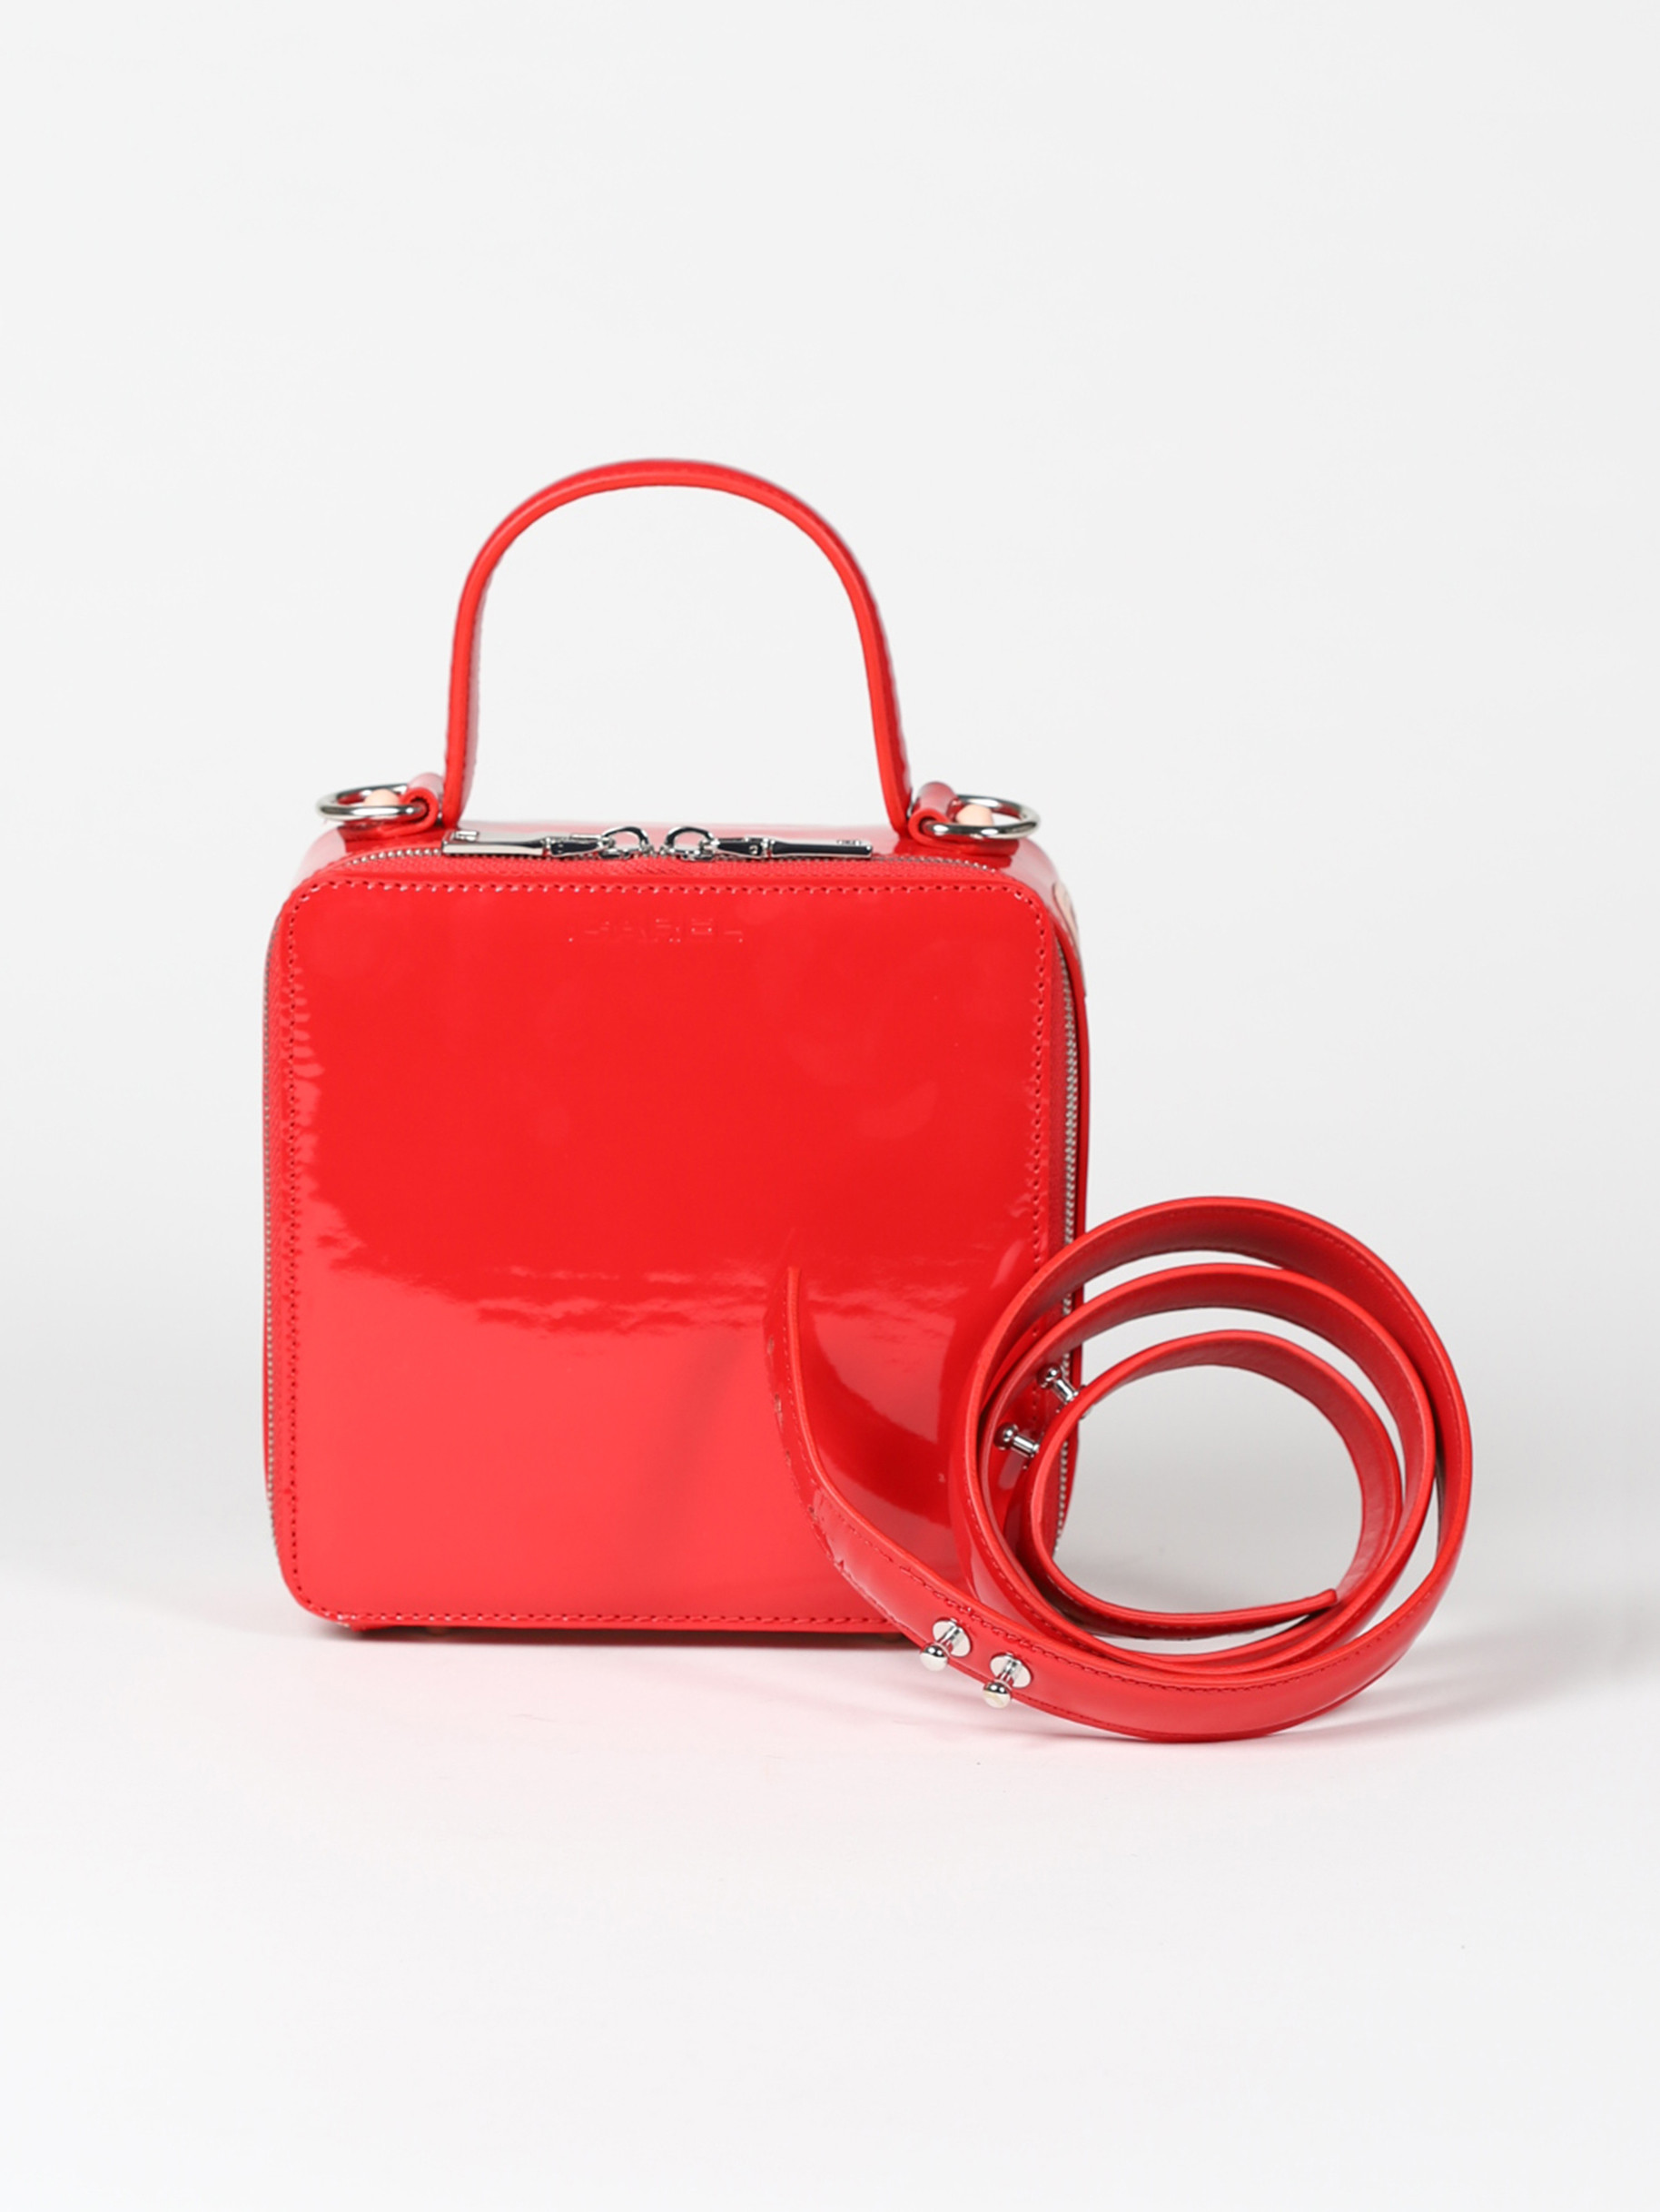 Carre Red Patent Leather Bag Carel, Red Leather Suitcase